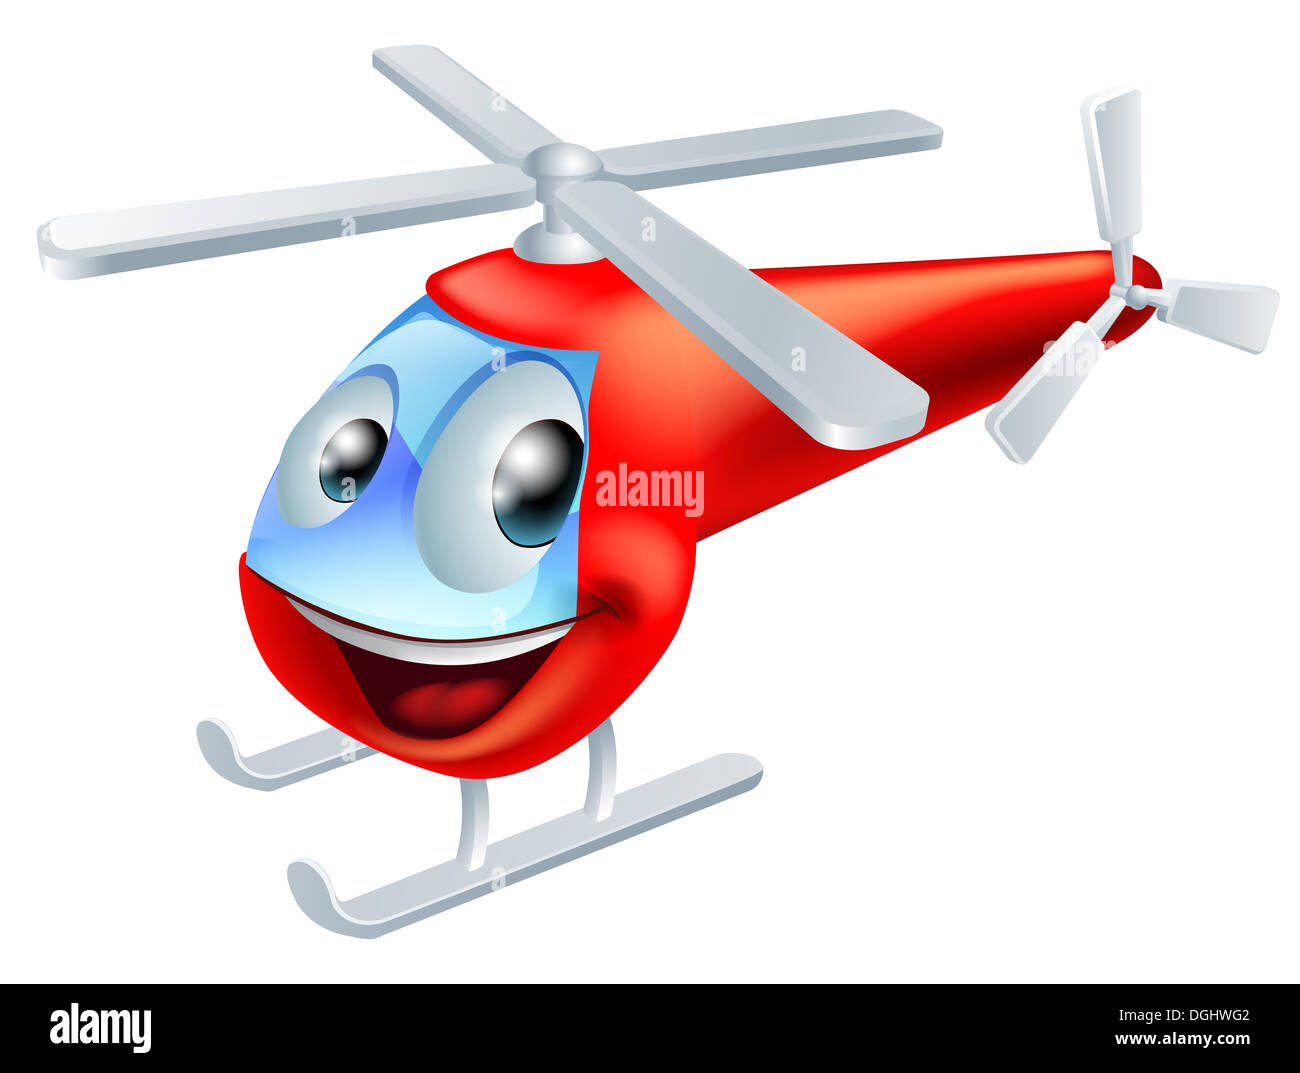 Illustration of a cute red helicopter children’s cartoon character Stock Photo